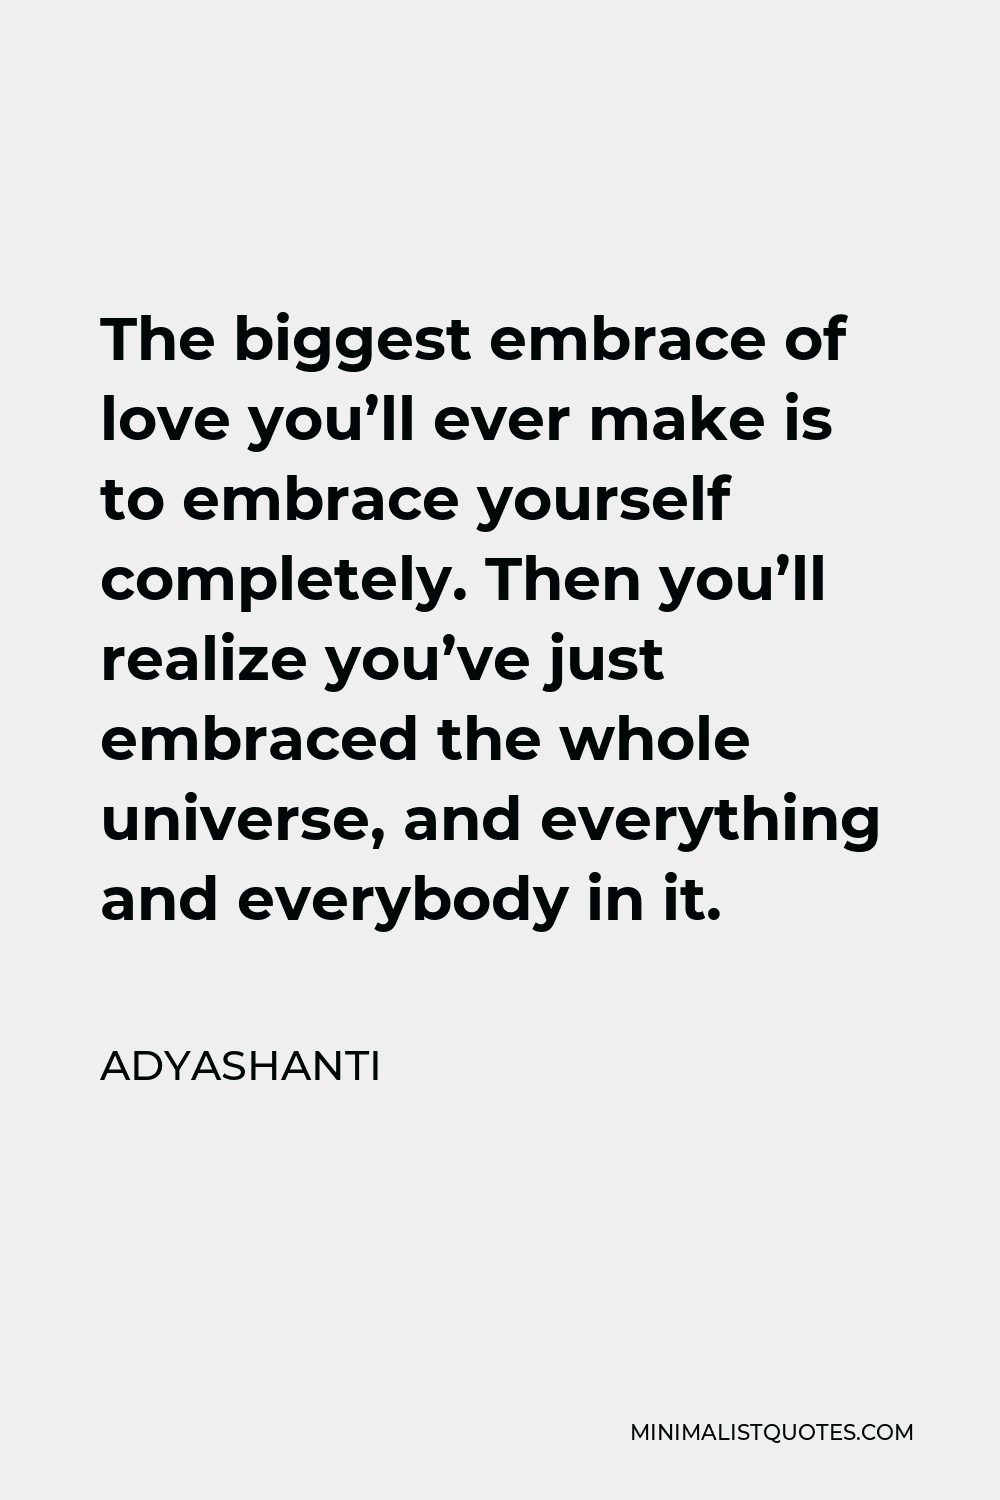 Adyashanti Quote - The biggest embrace of love you’ll ever make is to embrace yourself completely. Then you’ll realize you’ve just embraced the whole universe, and everything and everybody in it.